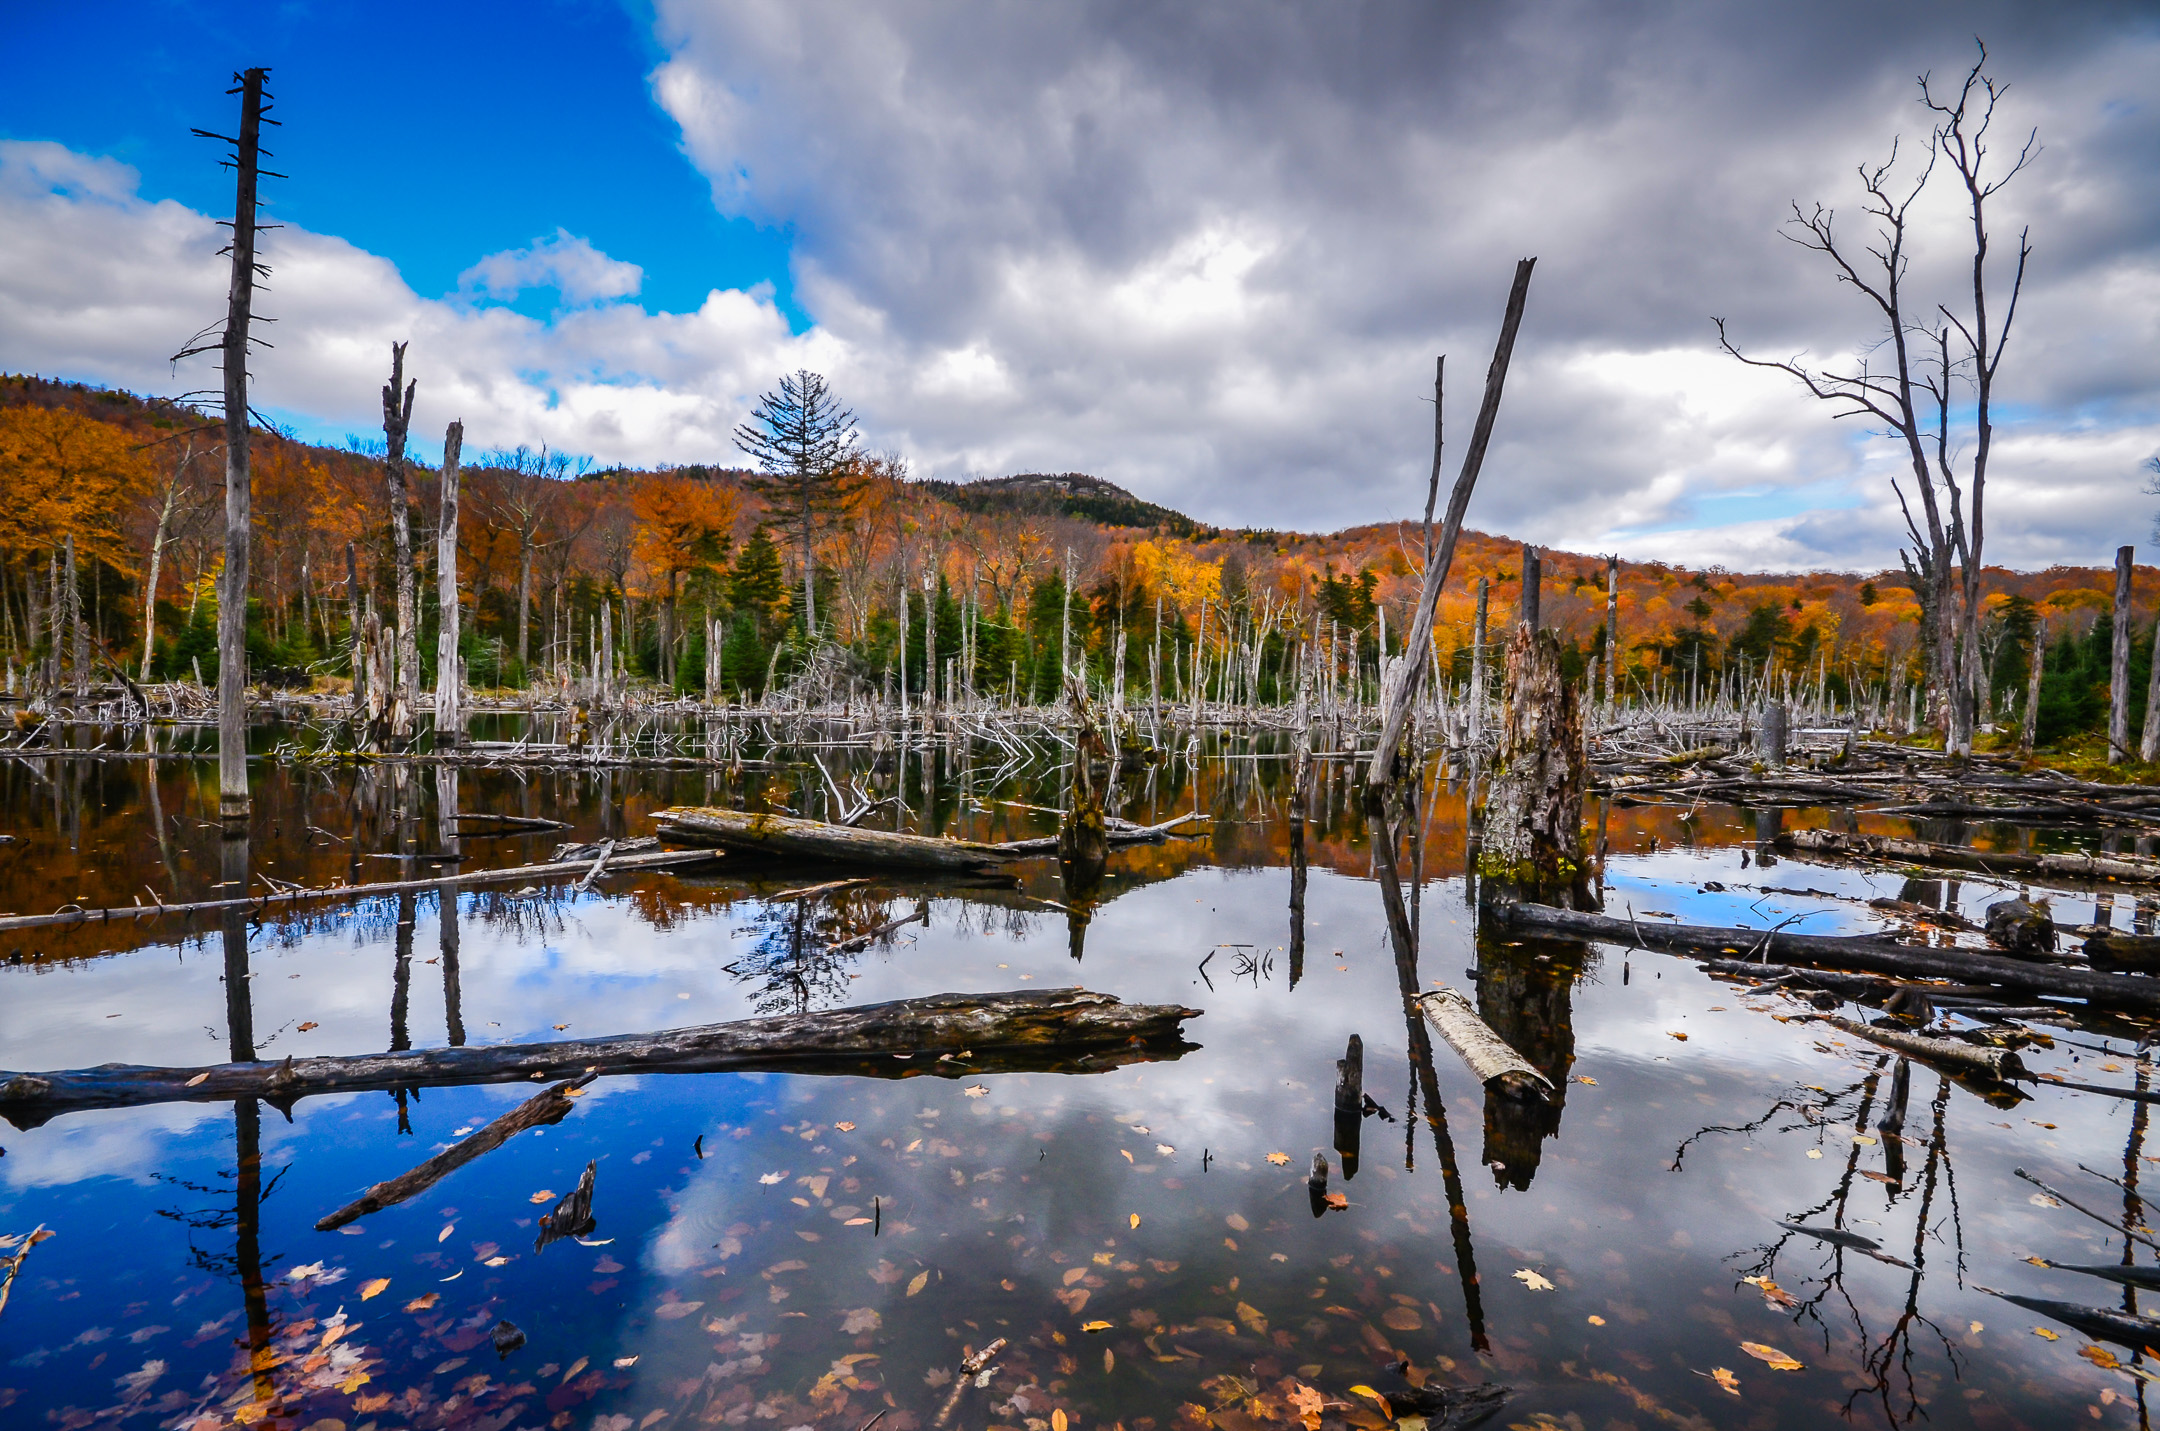 Reflection of clouds and fall foliage on pond in the Adirondacks.